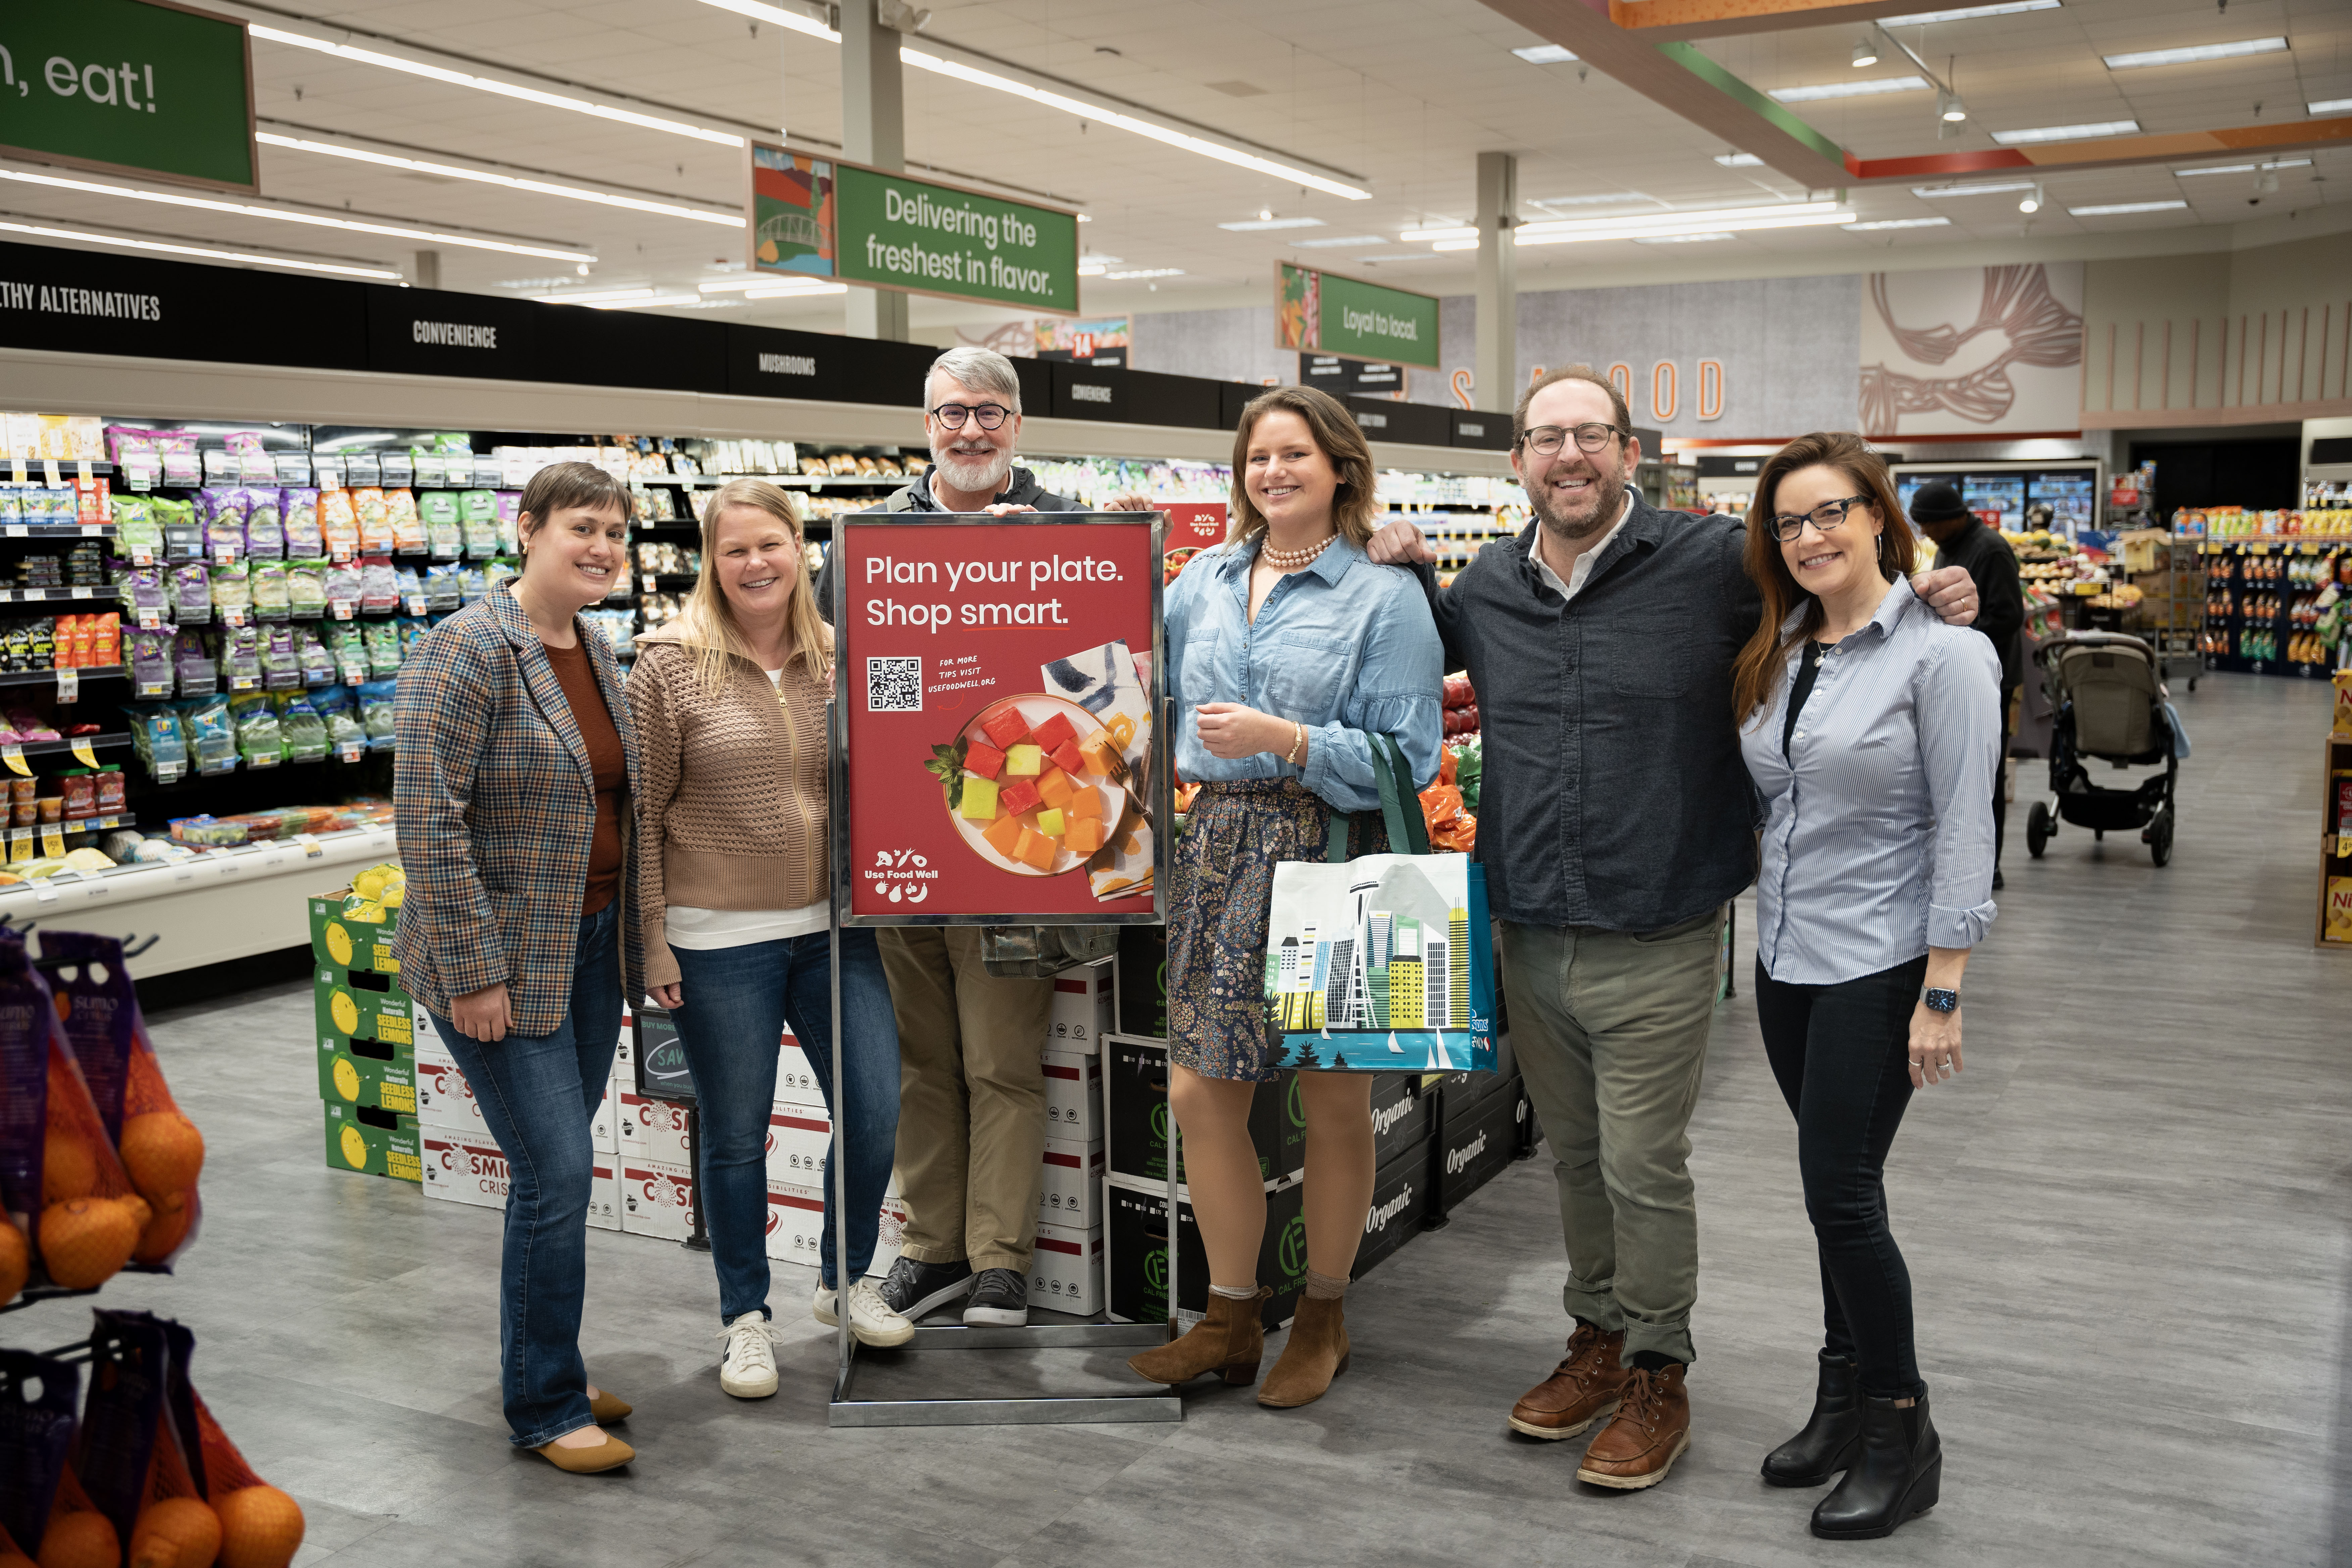 Six smiling adults in grocery store around sign that says 